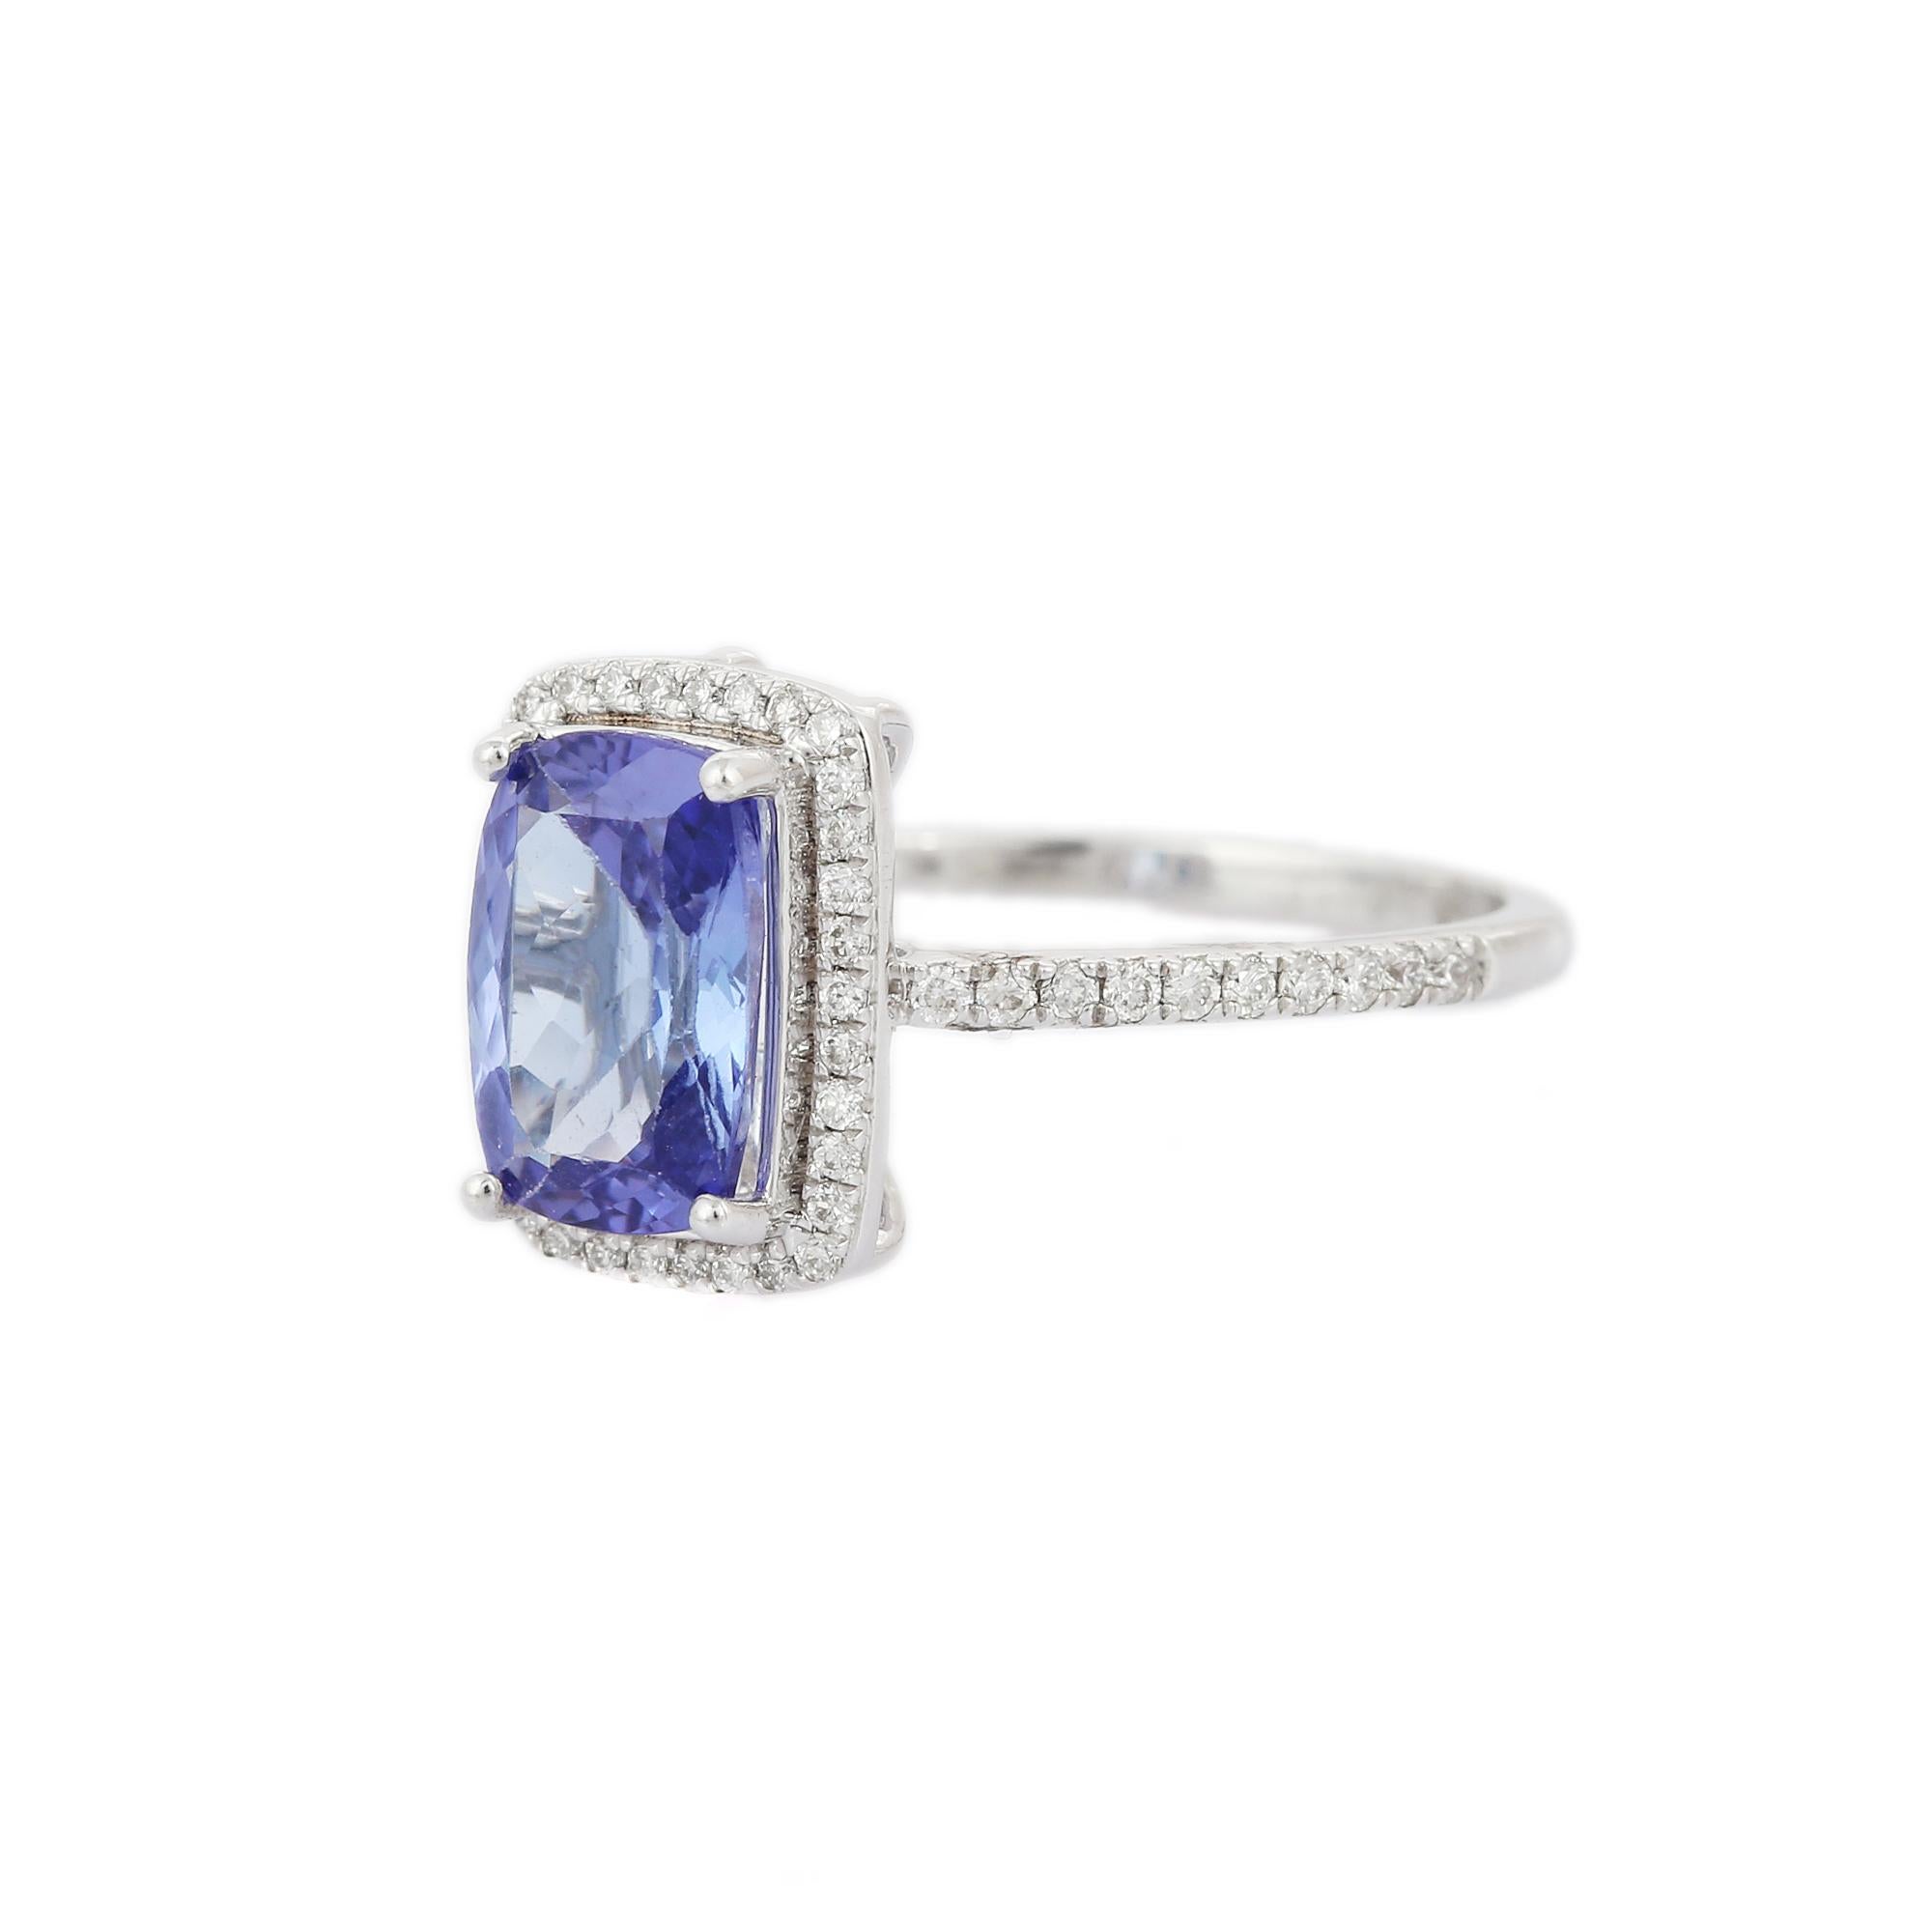 For Sale:  1.76 Carat Tanzanite and Diamond Ring in 18K White Gold 5